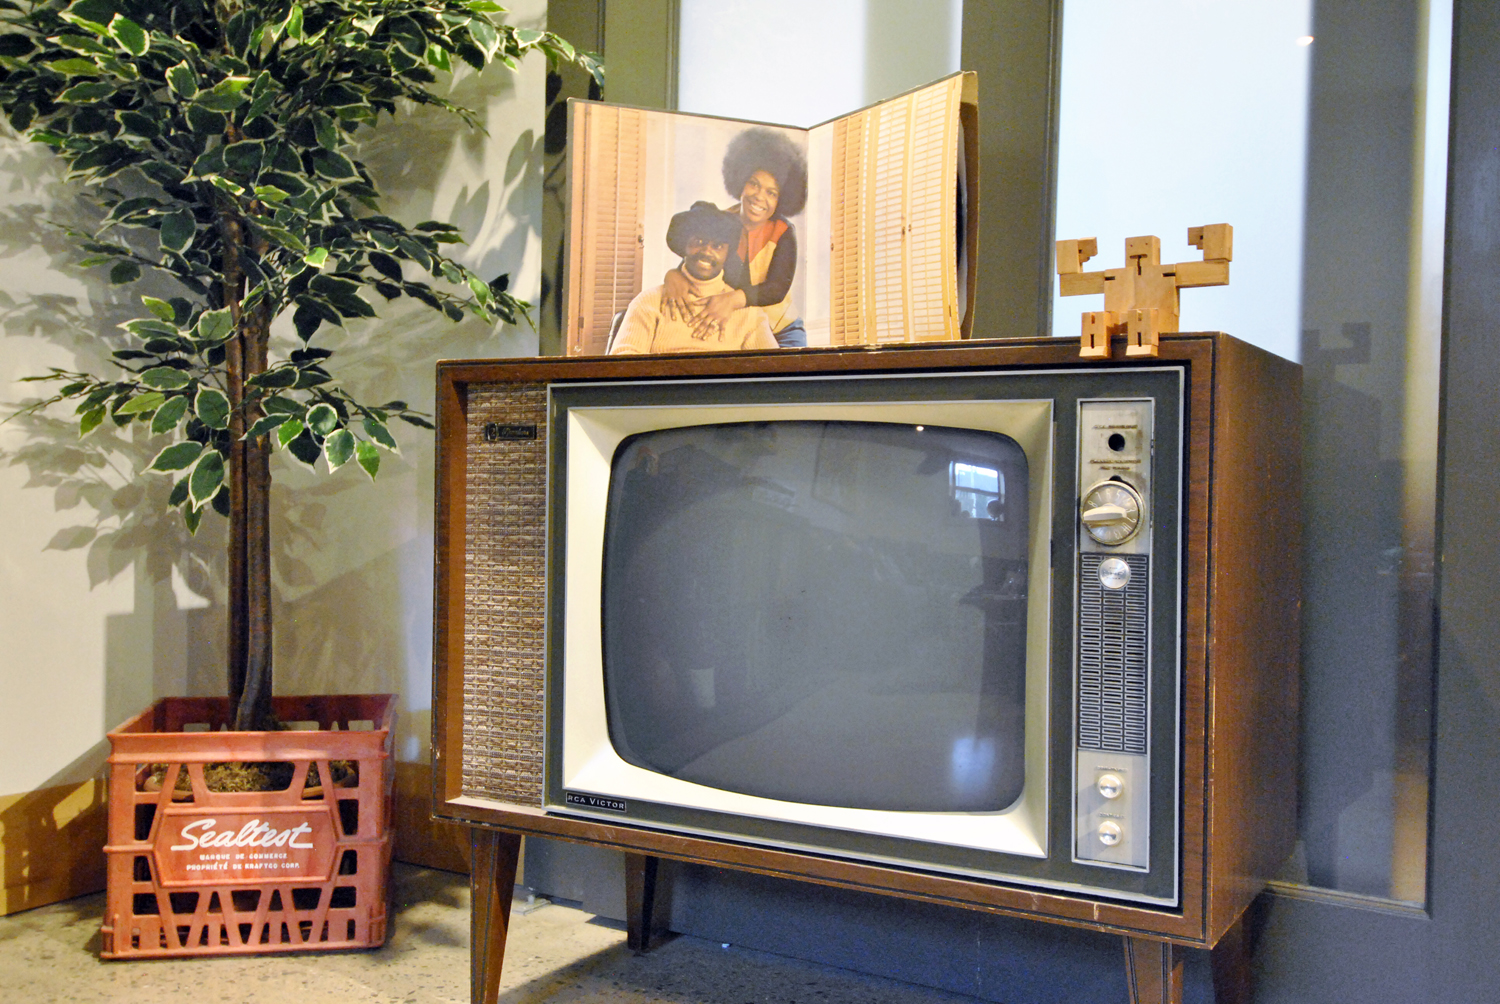 An old-fashioned TV in a basement apartment